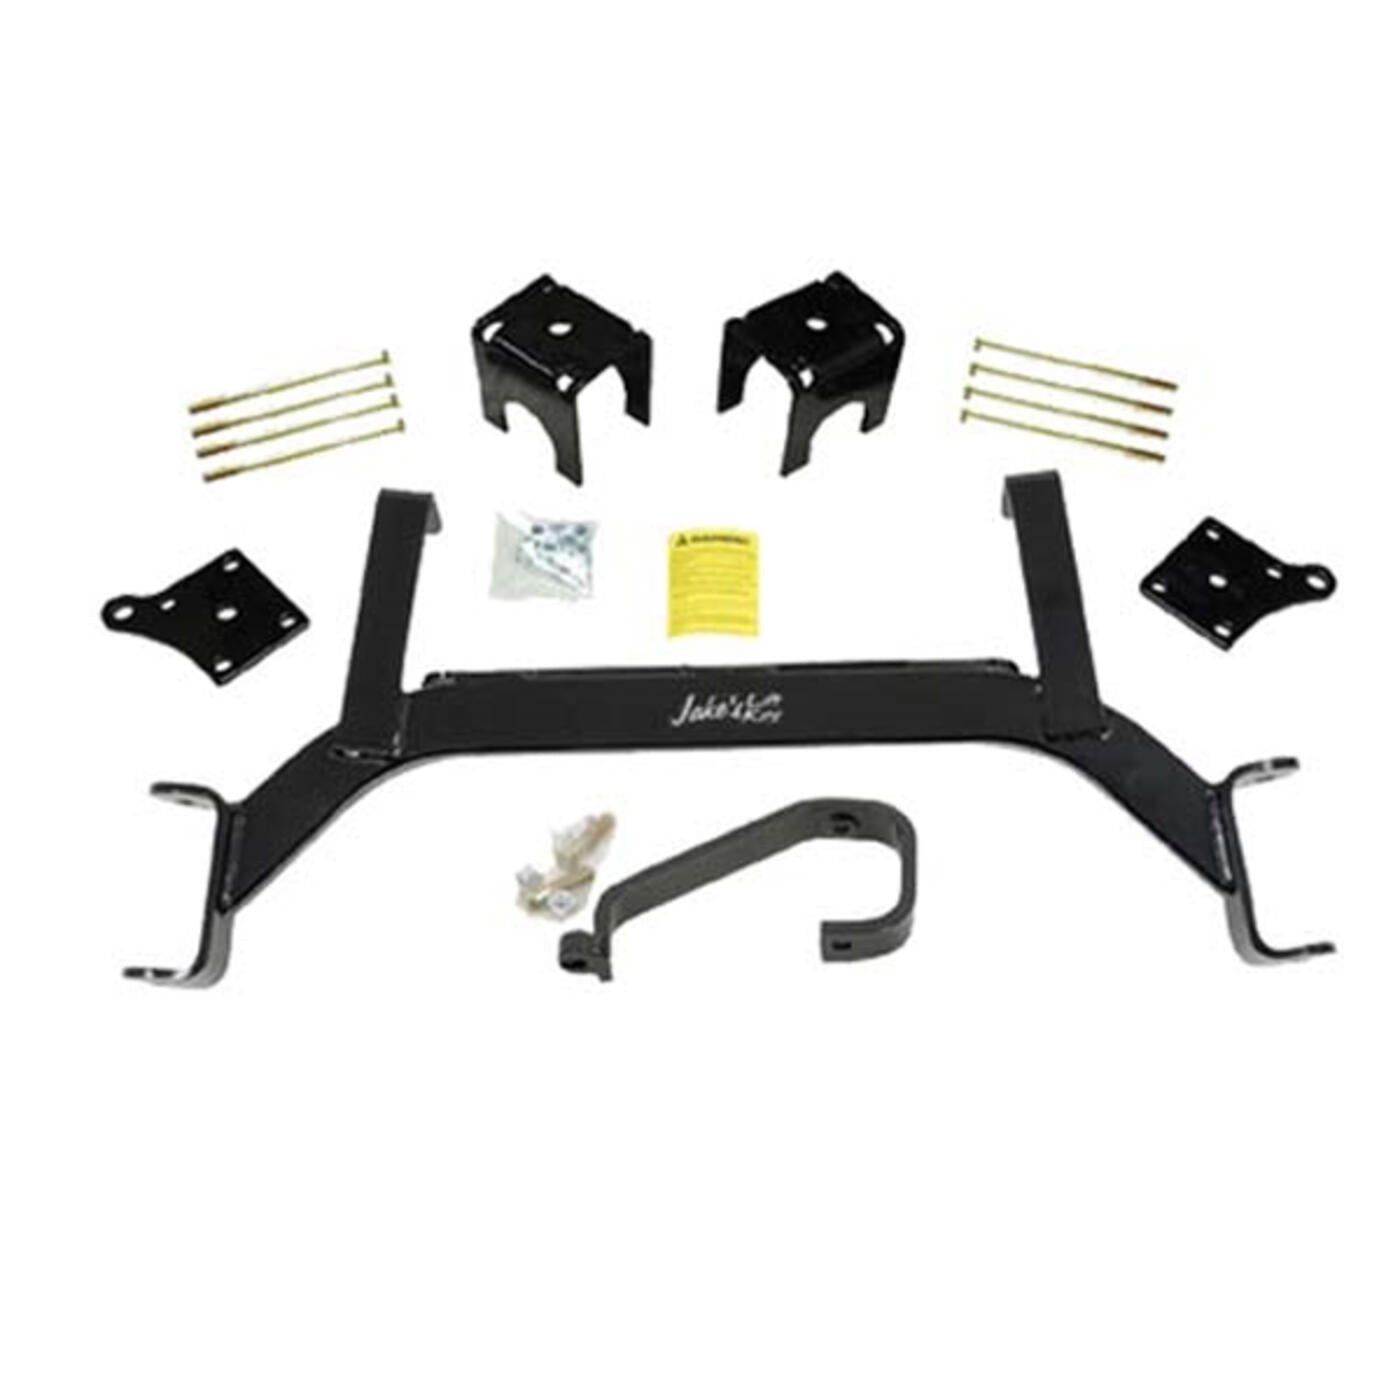 Jake'sTM 5" E-Z-GO TXT/T48 Electric Lift Kit Years 2013.5-Up